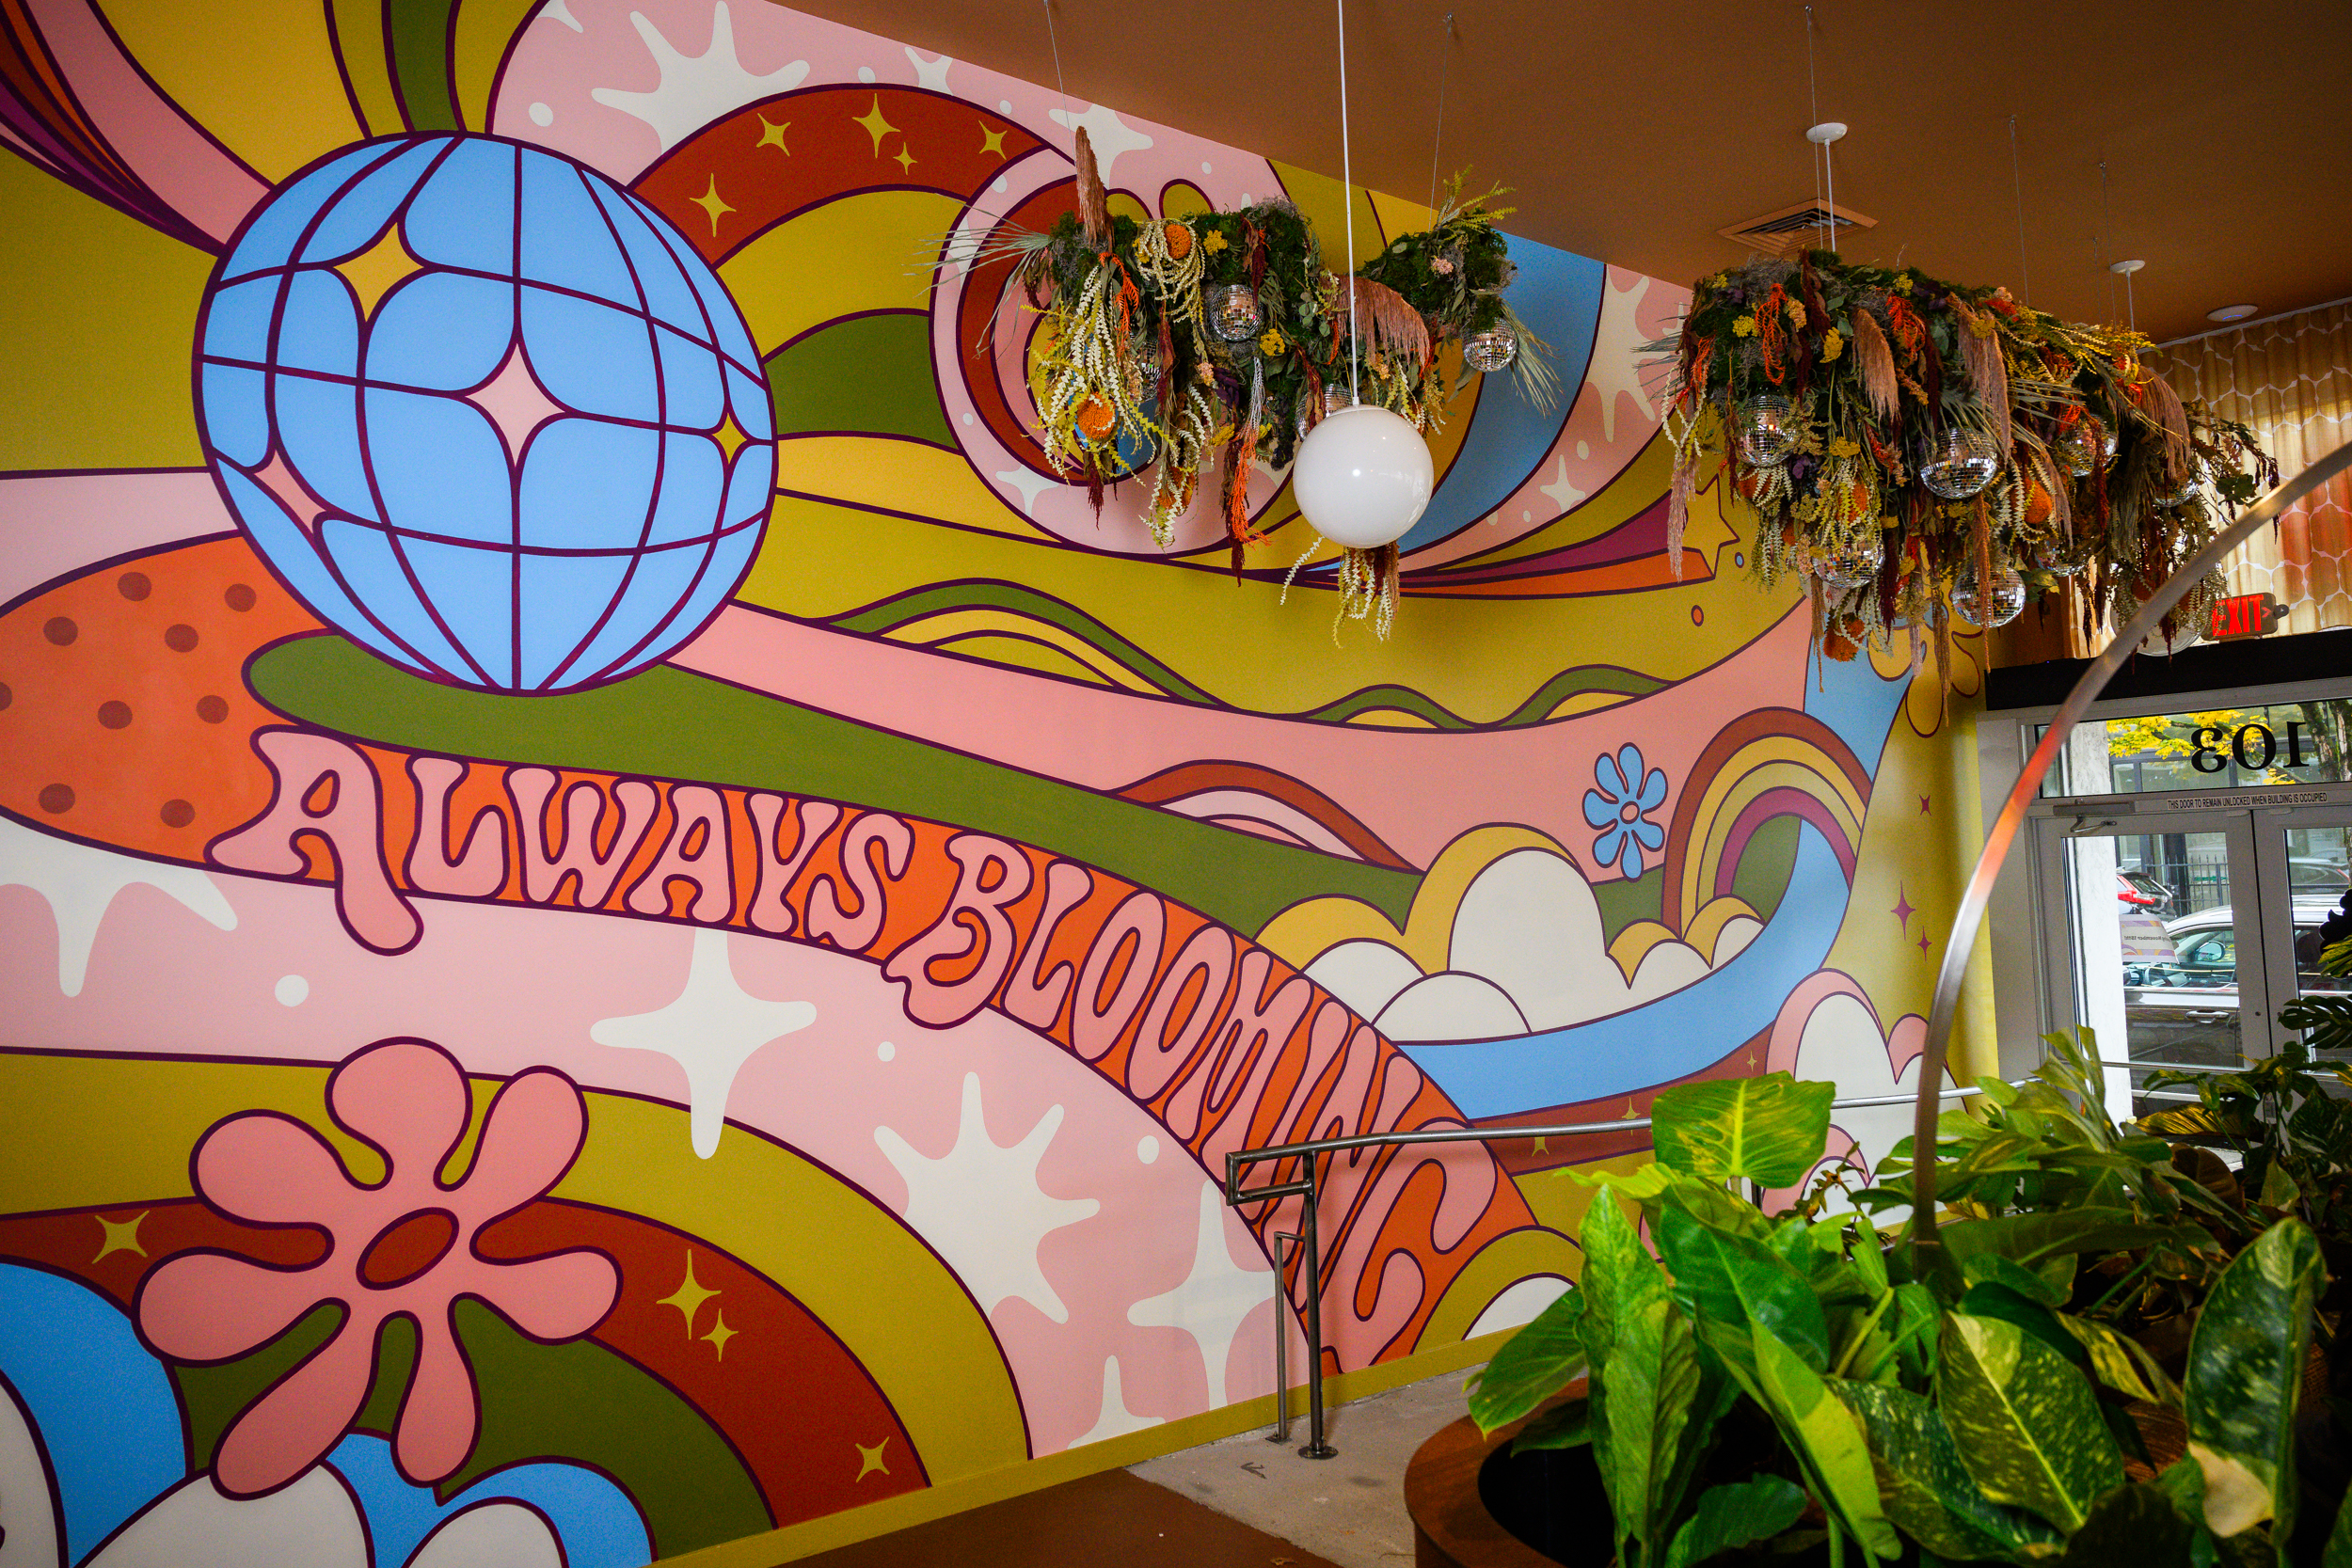 The mural at Flour Bloom.